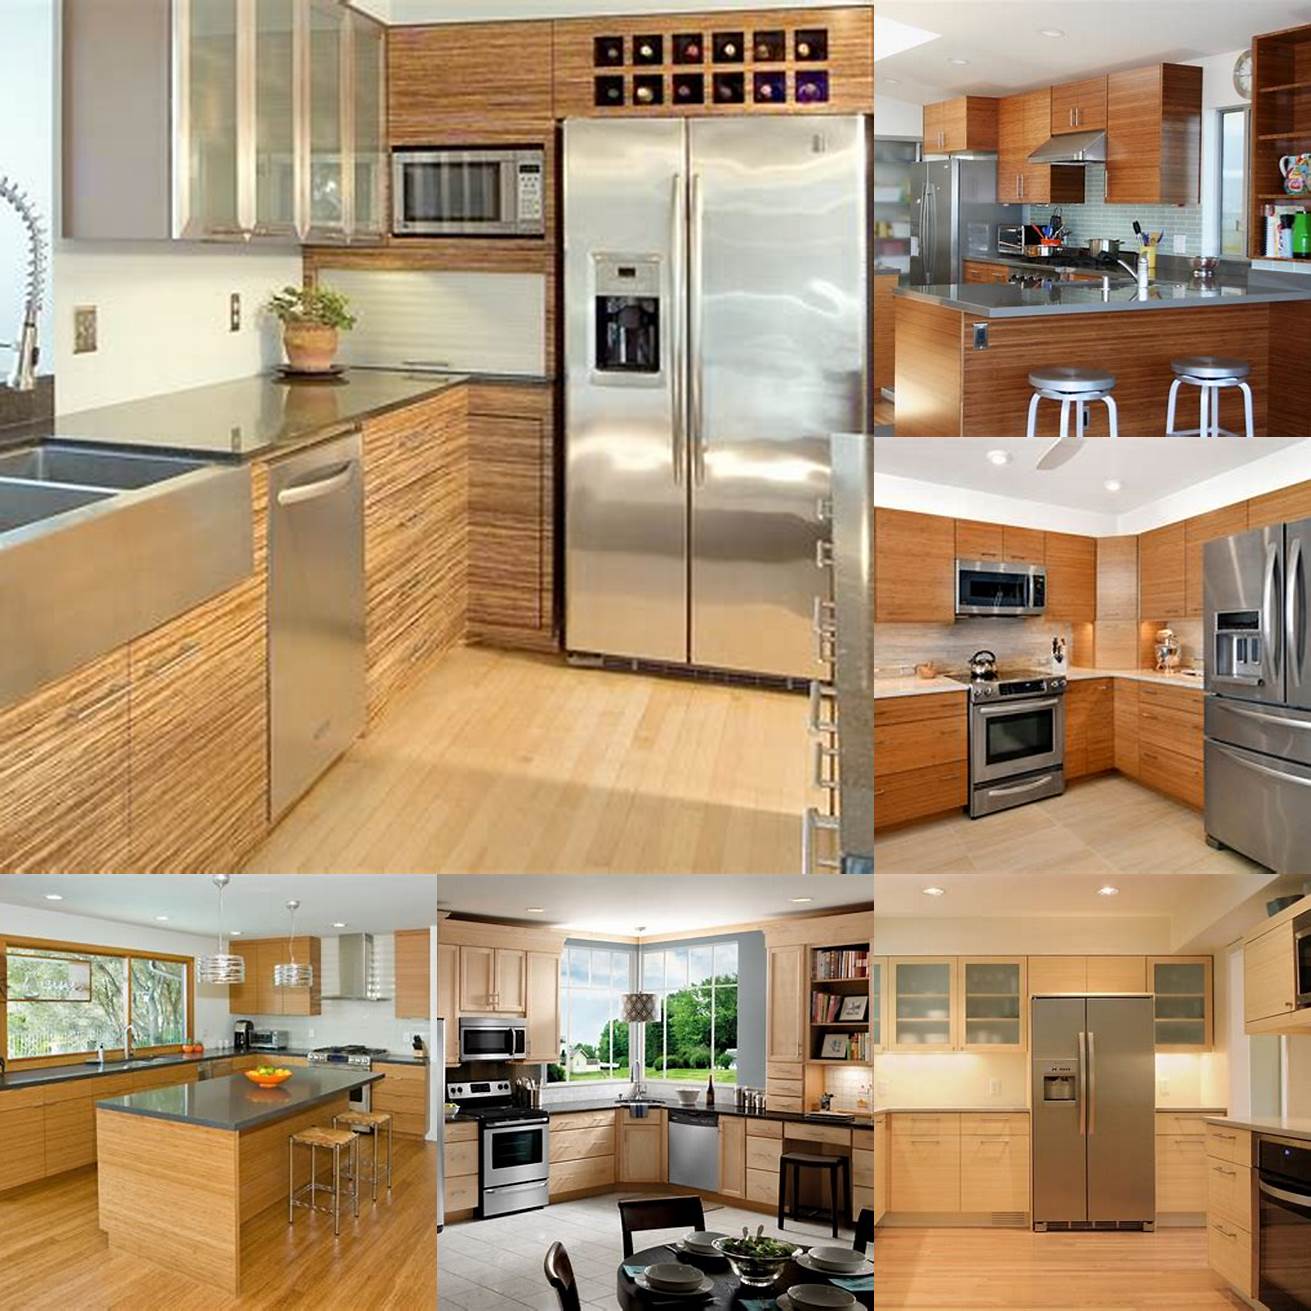 Bamboo kitchen cabinets with stainless steel appliances